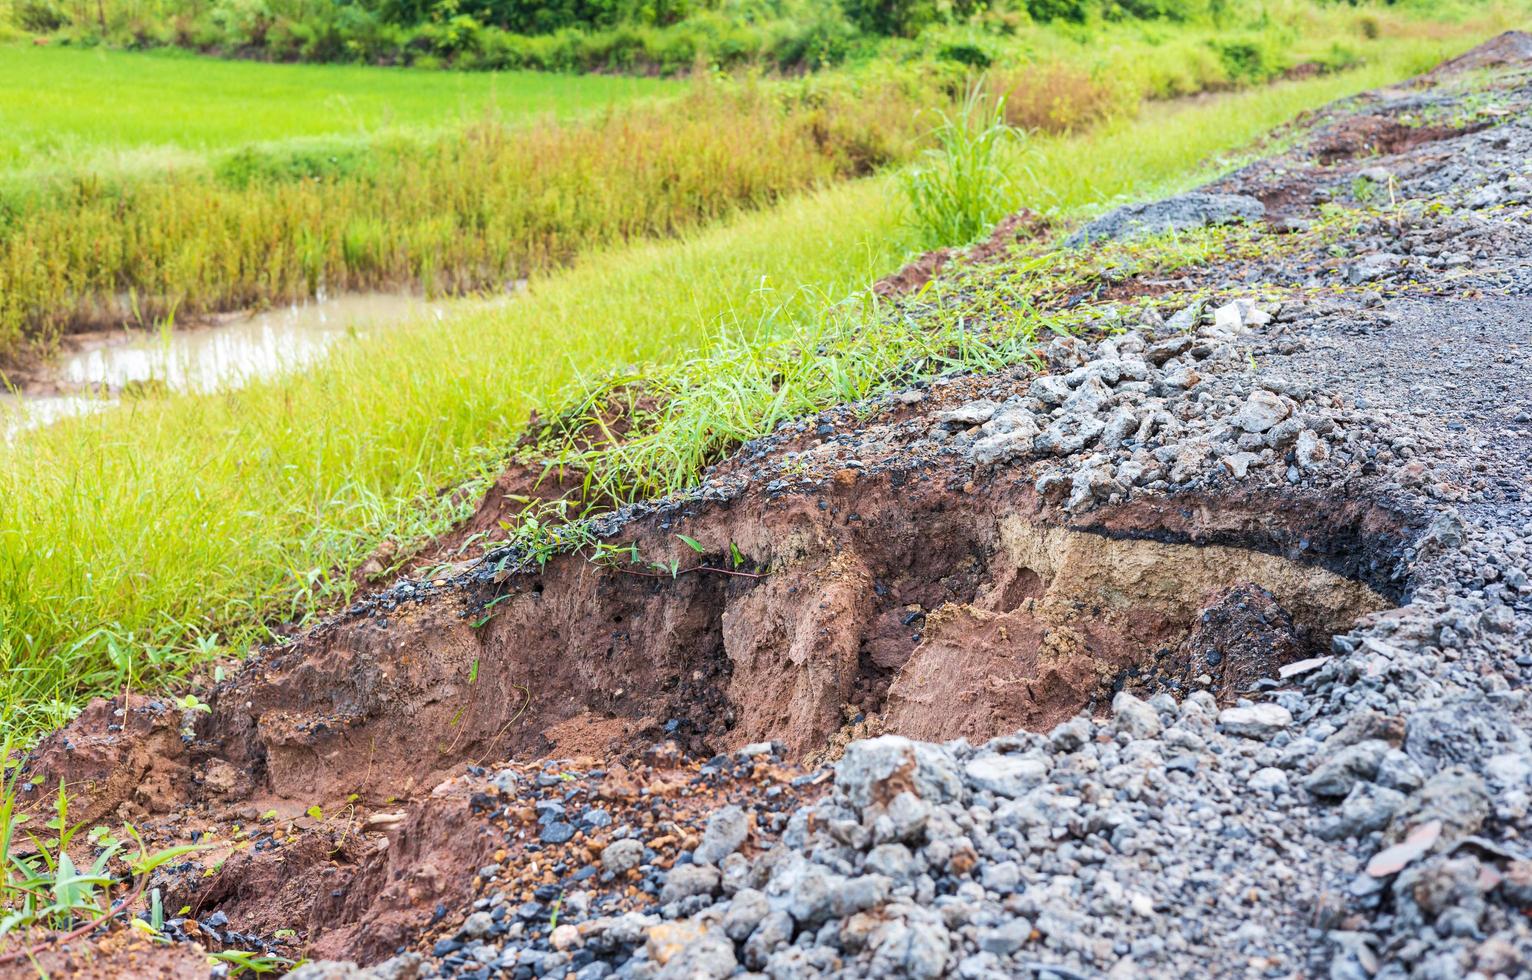 A side view of the stone paved road which was damaged into a pothole. photo